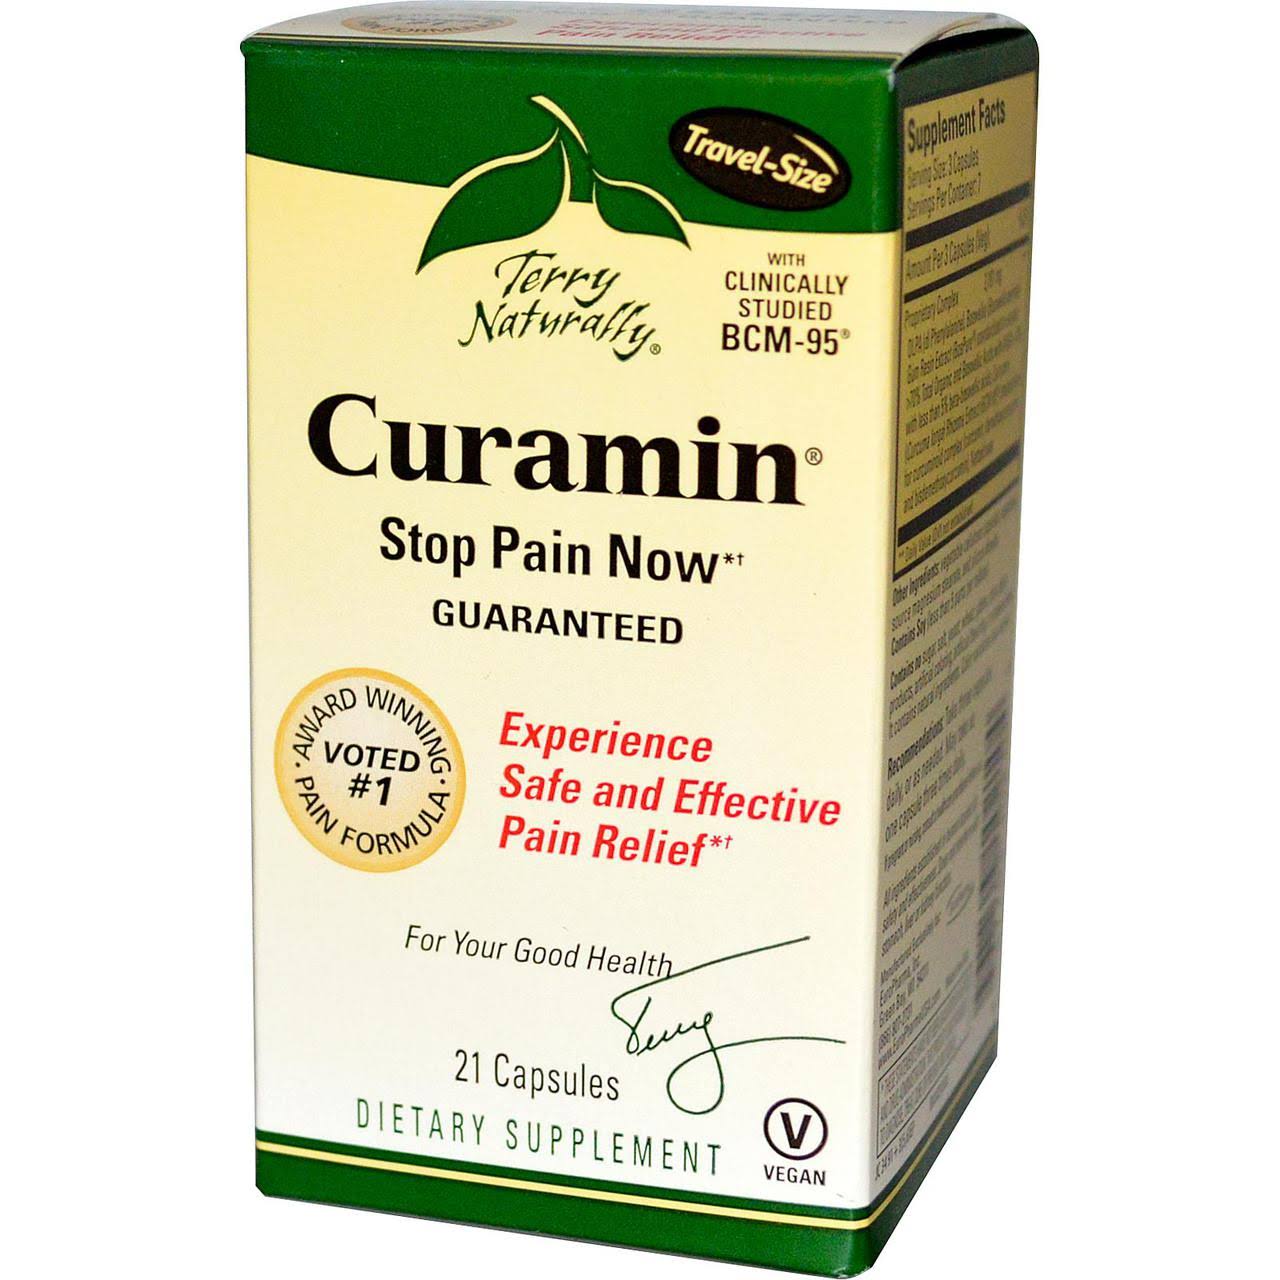 Terry Naturally Curamin Dietary Supplement - 21 Capsules